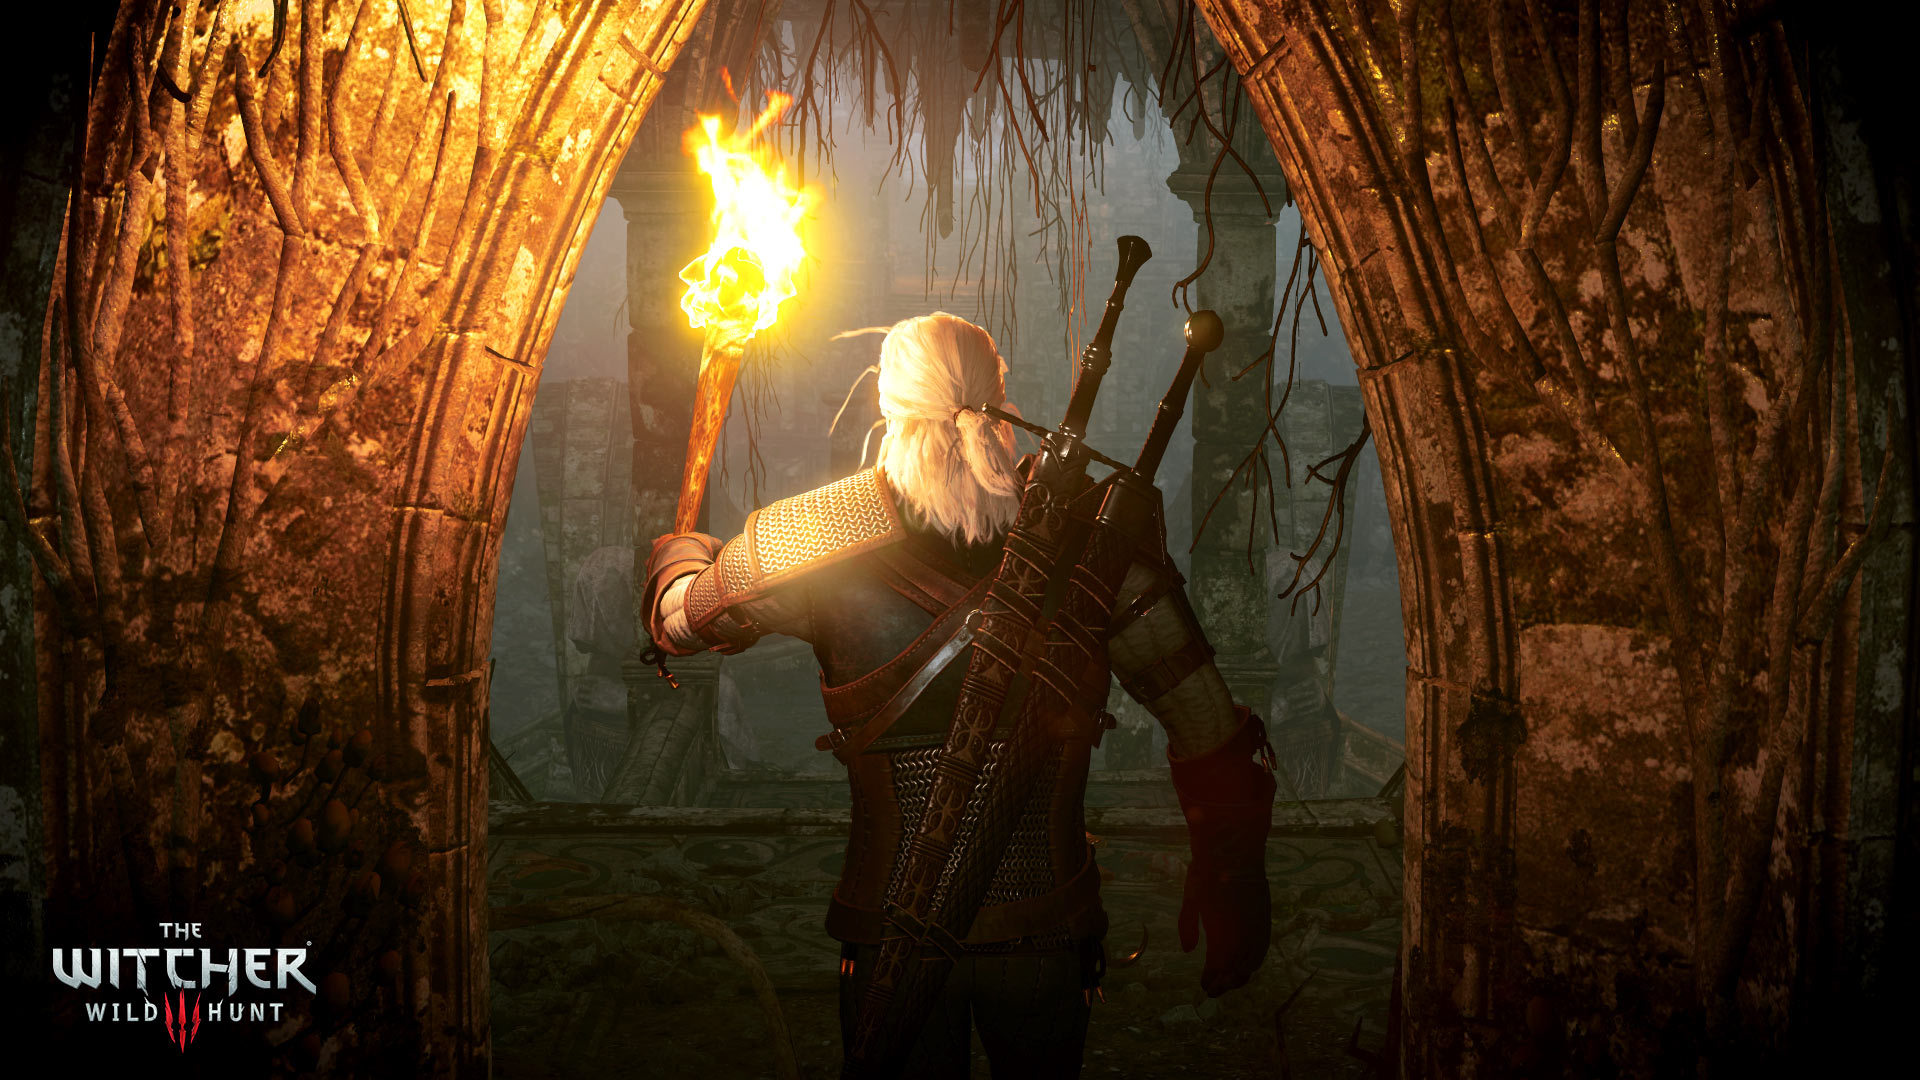 witcher 3 wild at heart quest